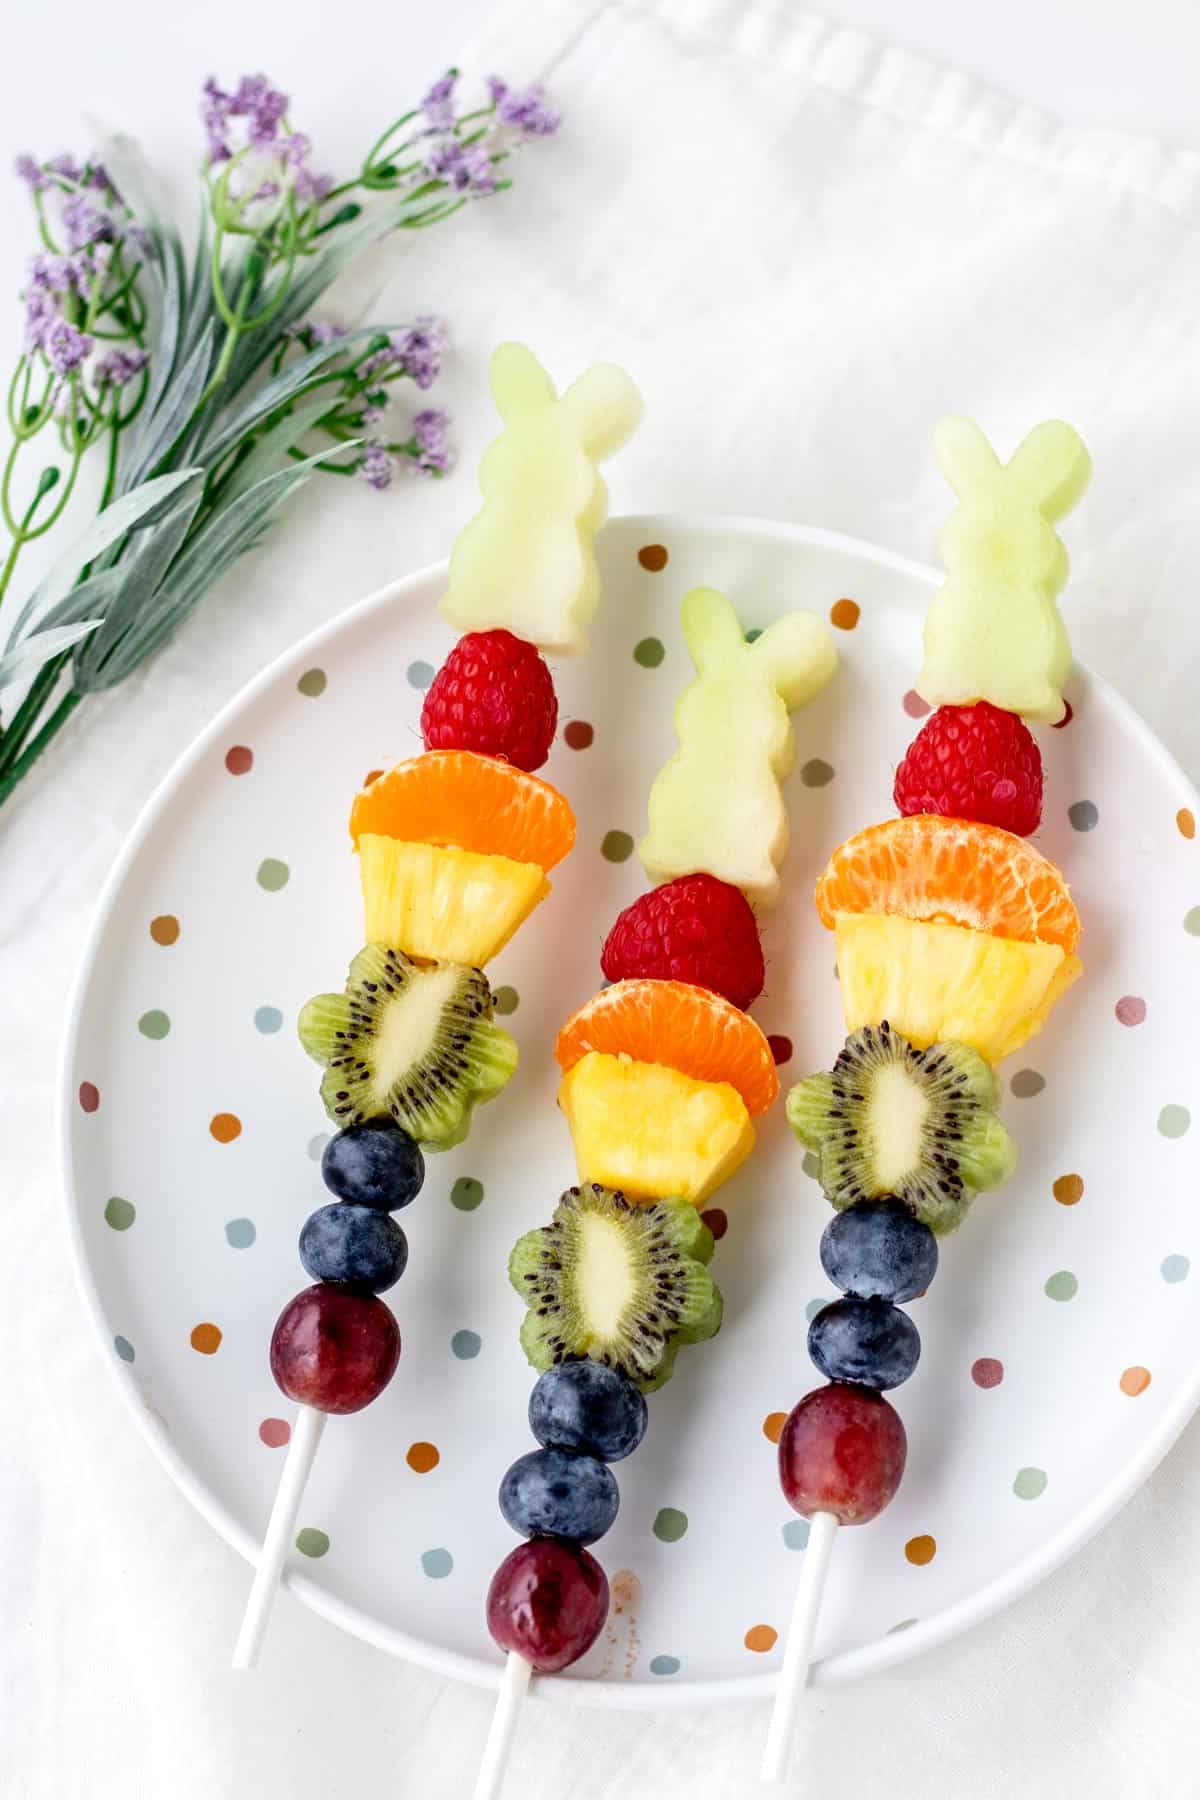 Easter fruit kabobs with bunny-shaped honeydew melon on a polka dotted plate.